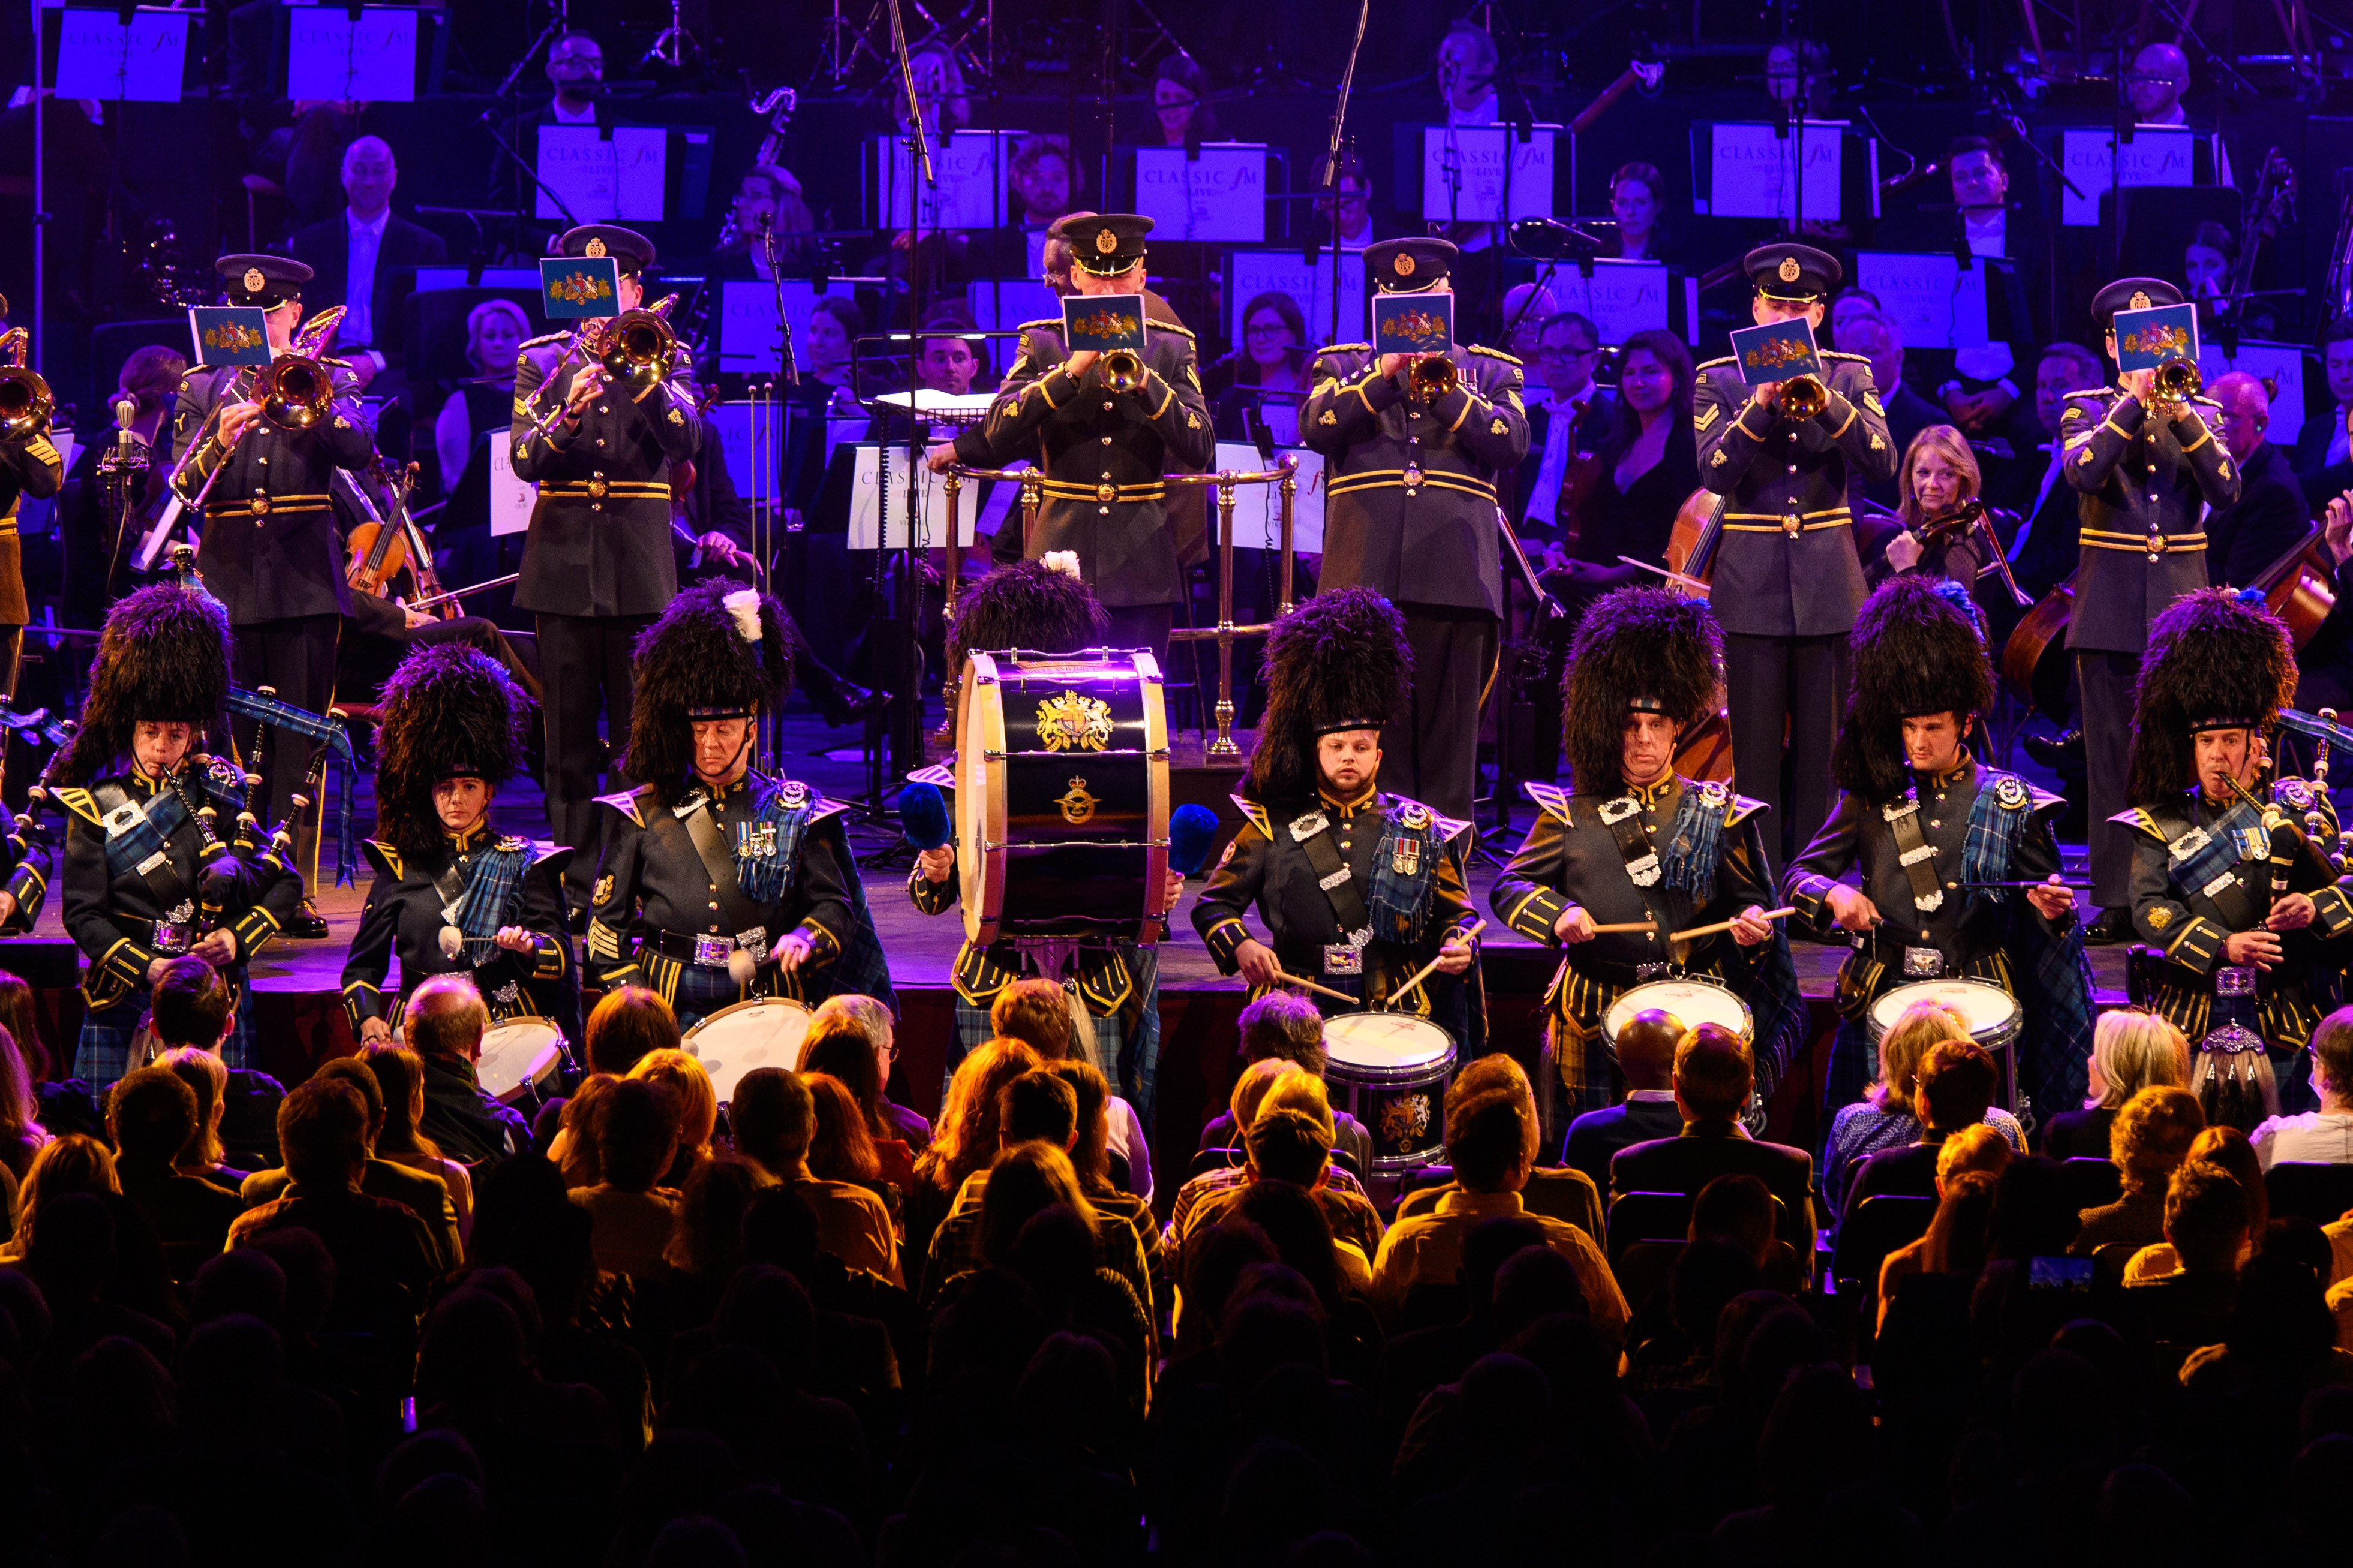 RAF Band perform during concert.